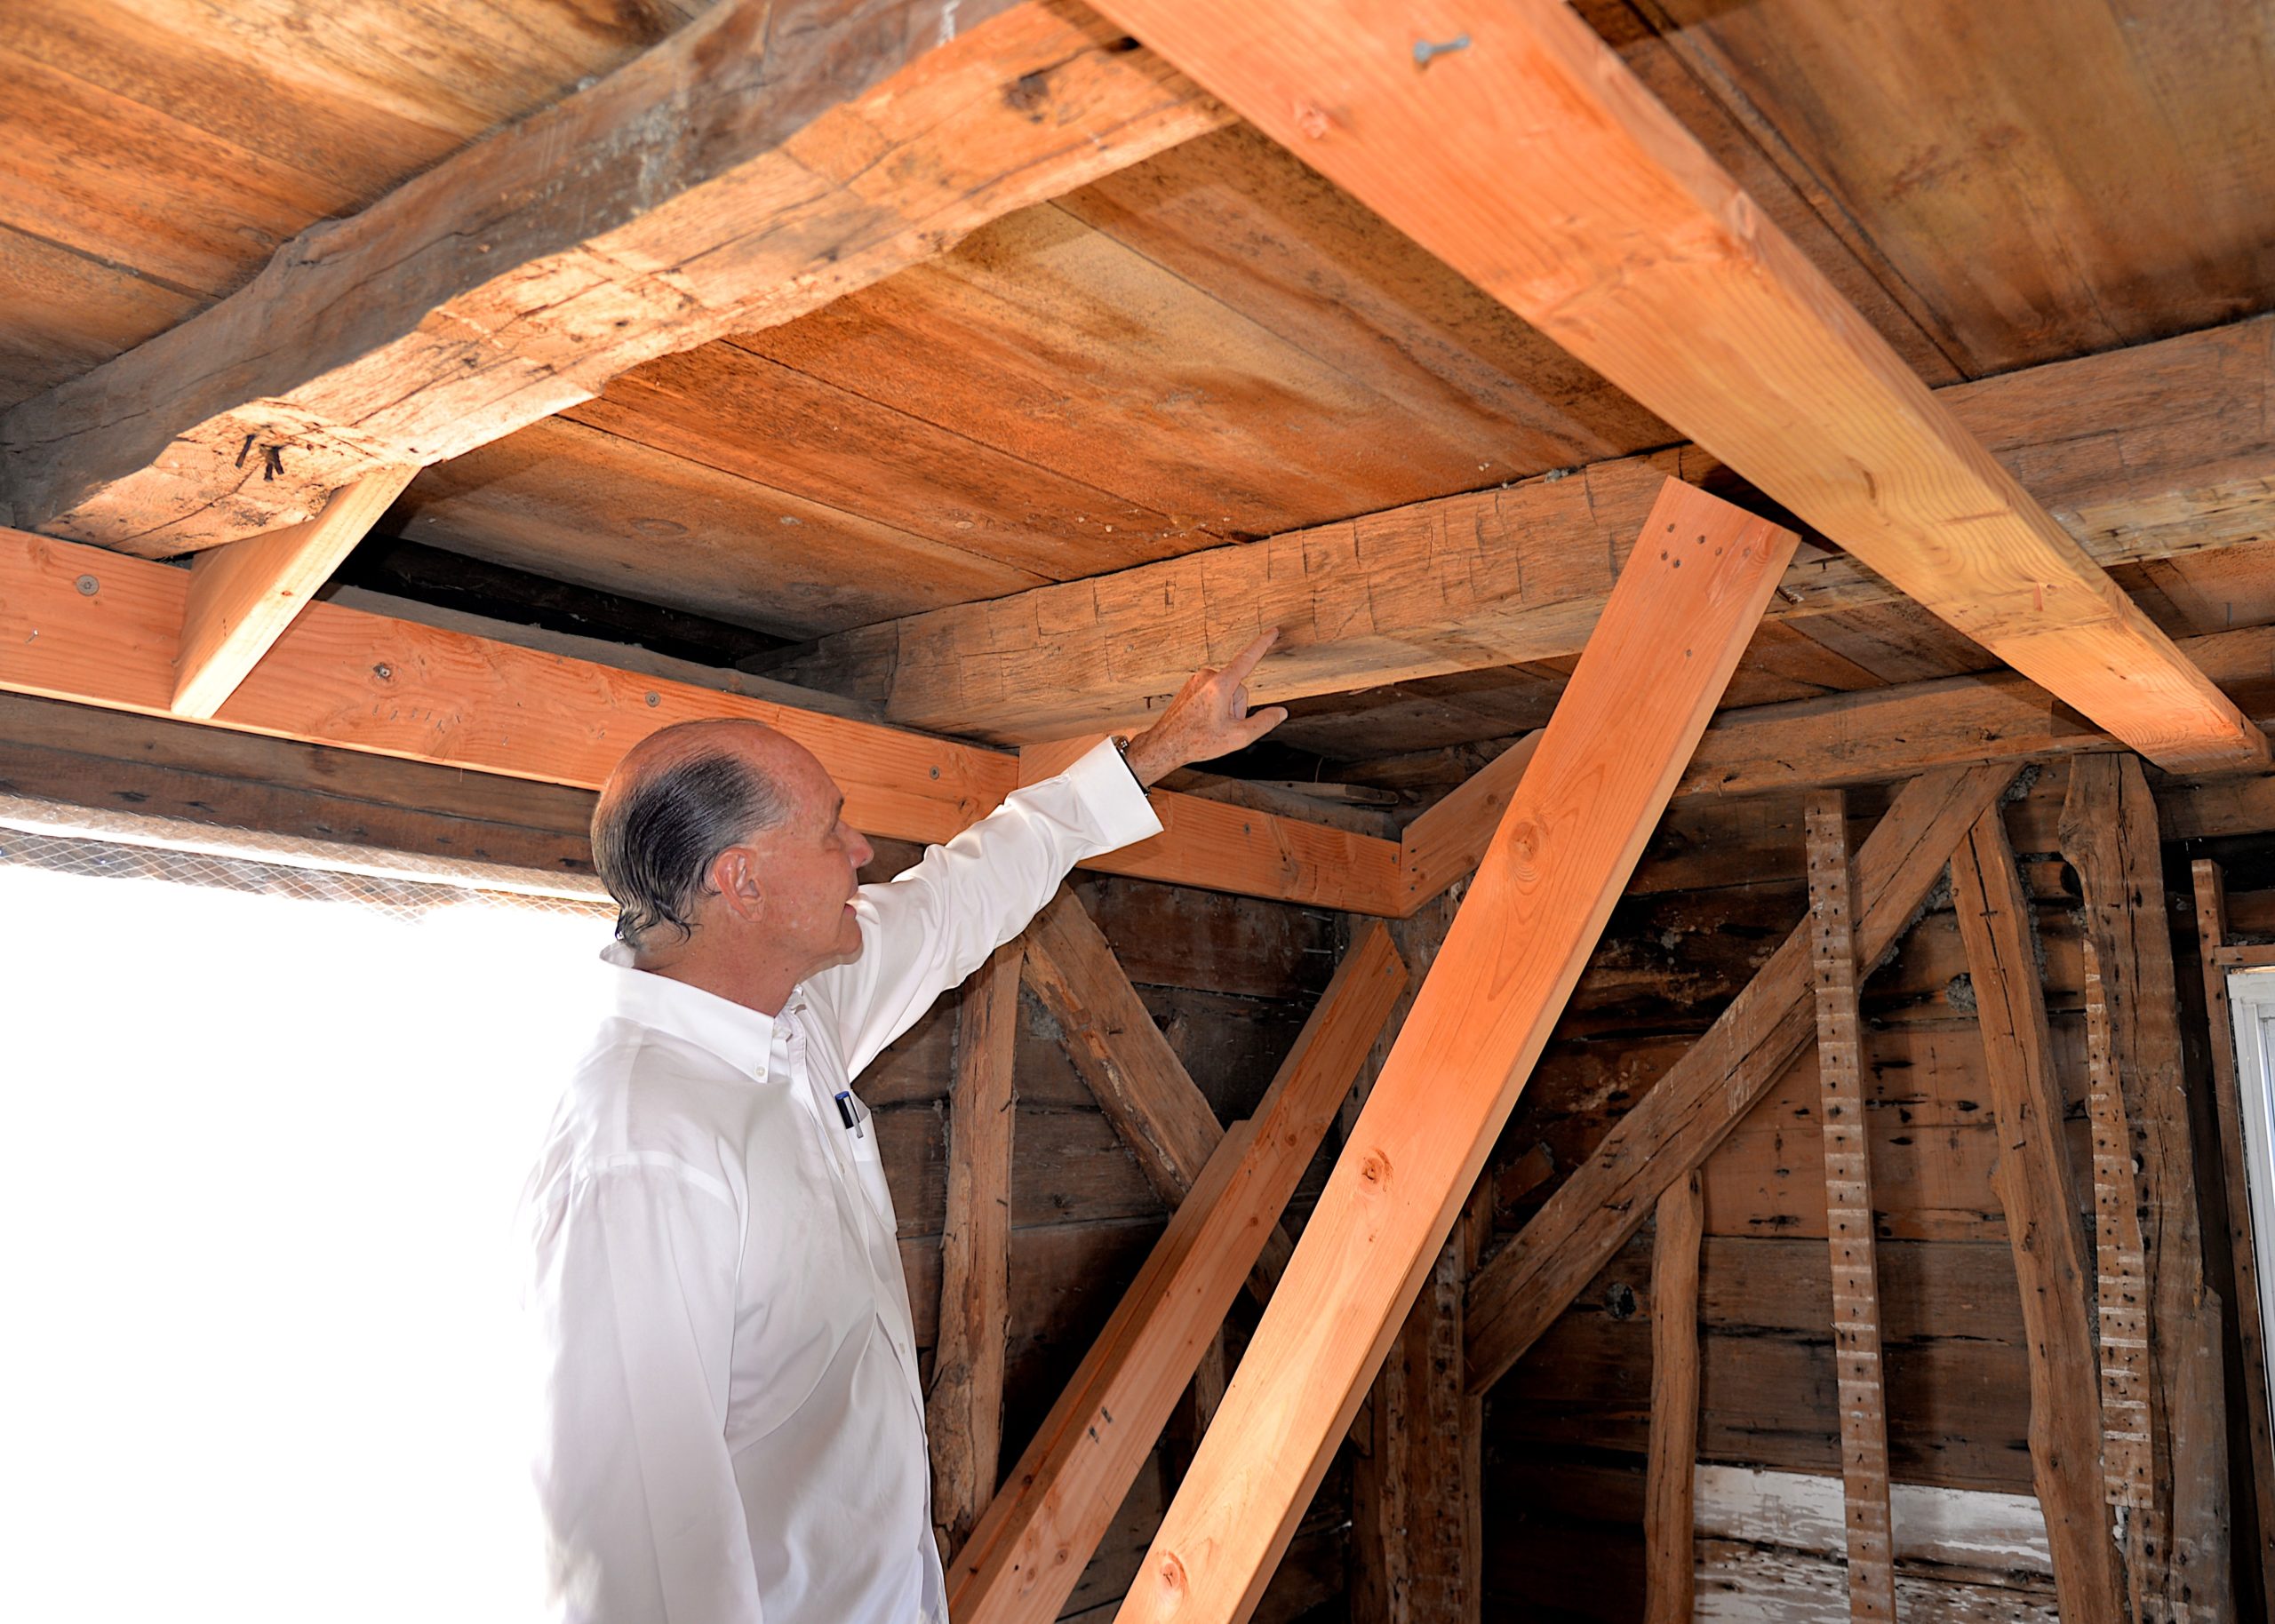 Jeffrey Colle shows off the hand-hewn beams in the historic home.KYRIL BROMLEY